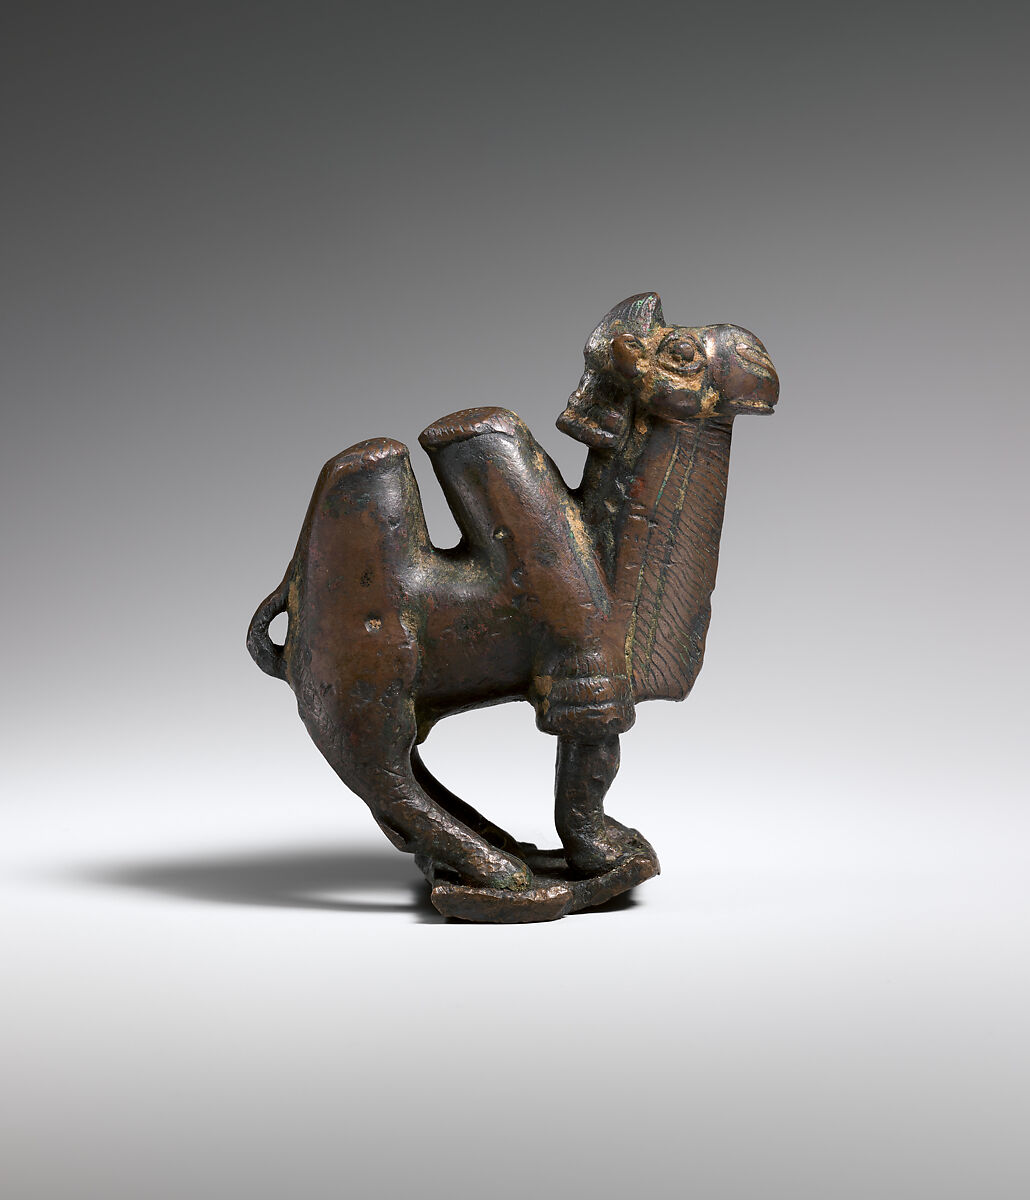 Bactrian camel, Copper alloy, Bactria-Margiana Archaeological Complex 